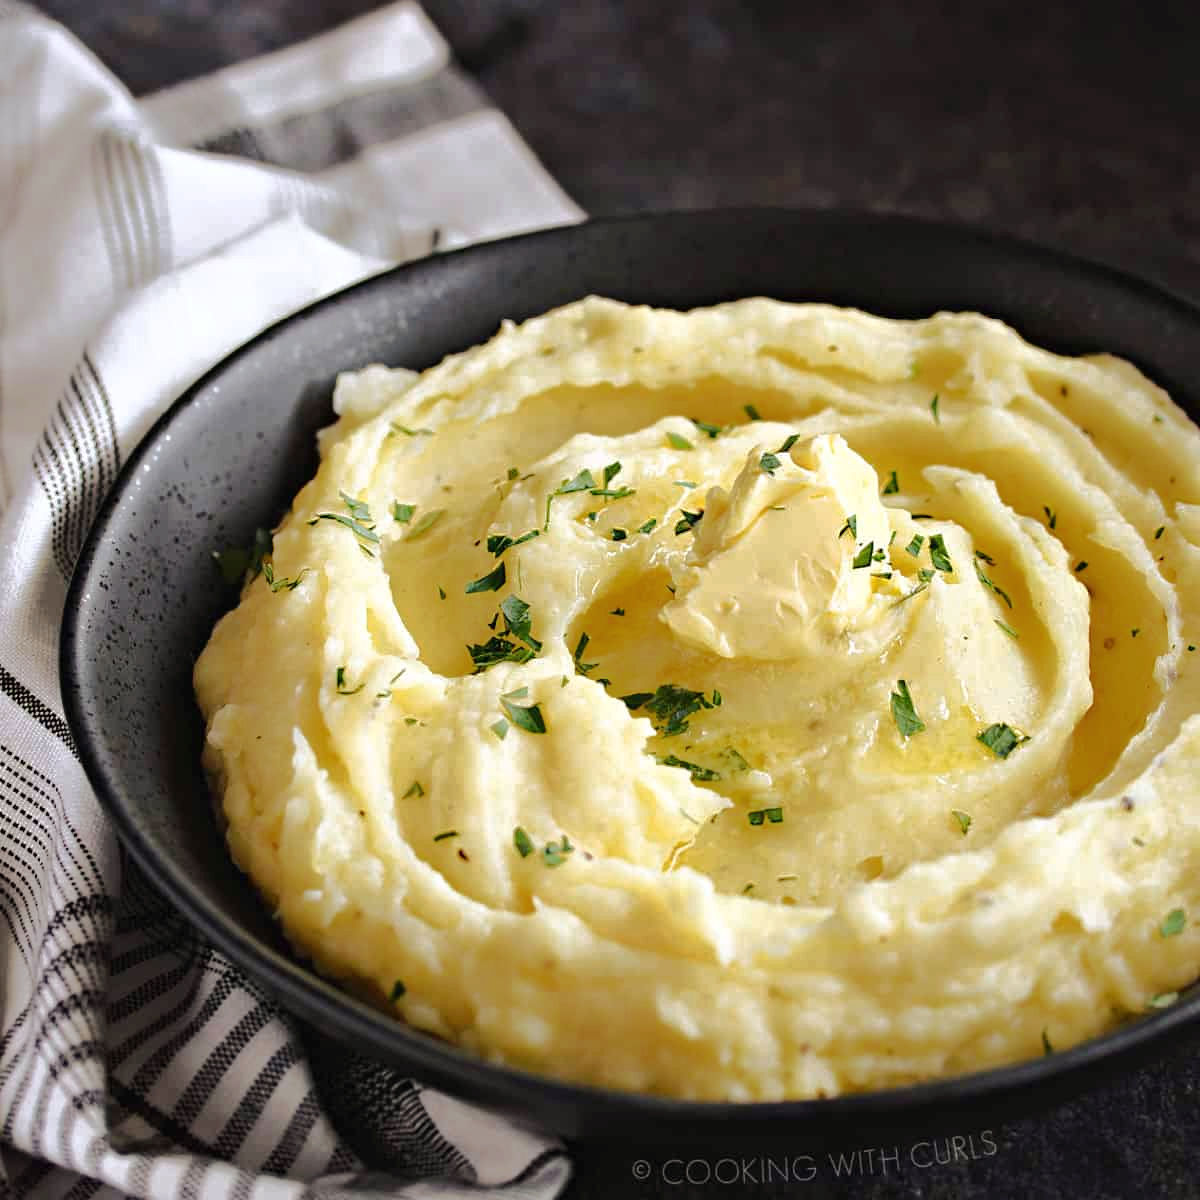 A bowl of creamy mashed potatoes topped with butter and parsley.